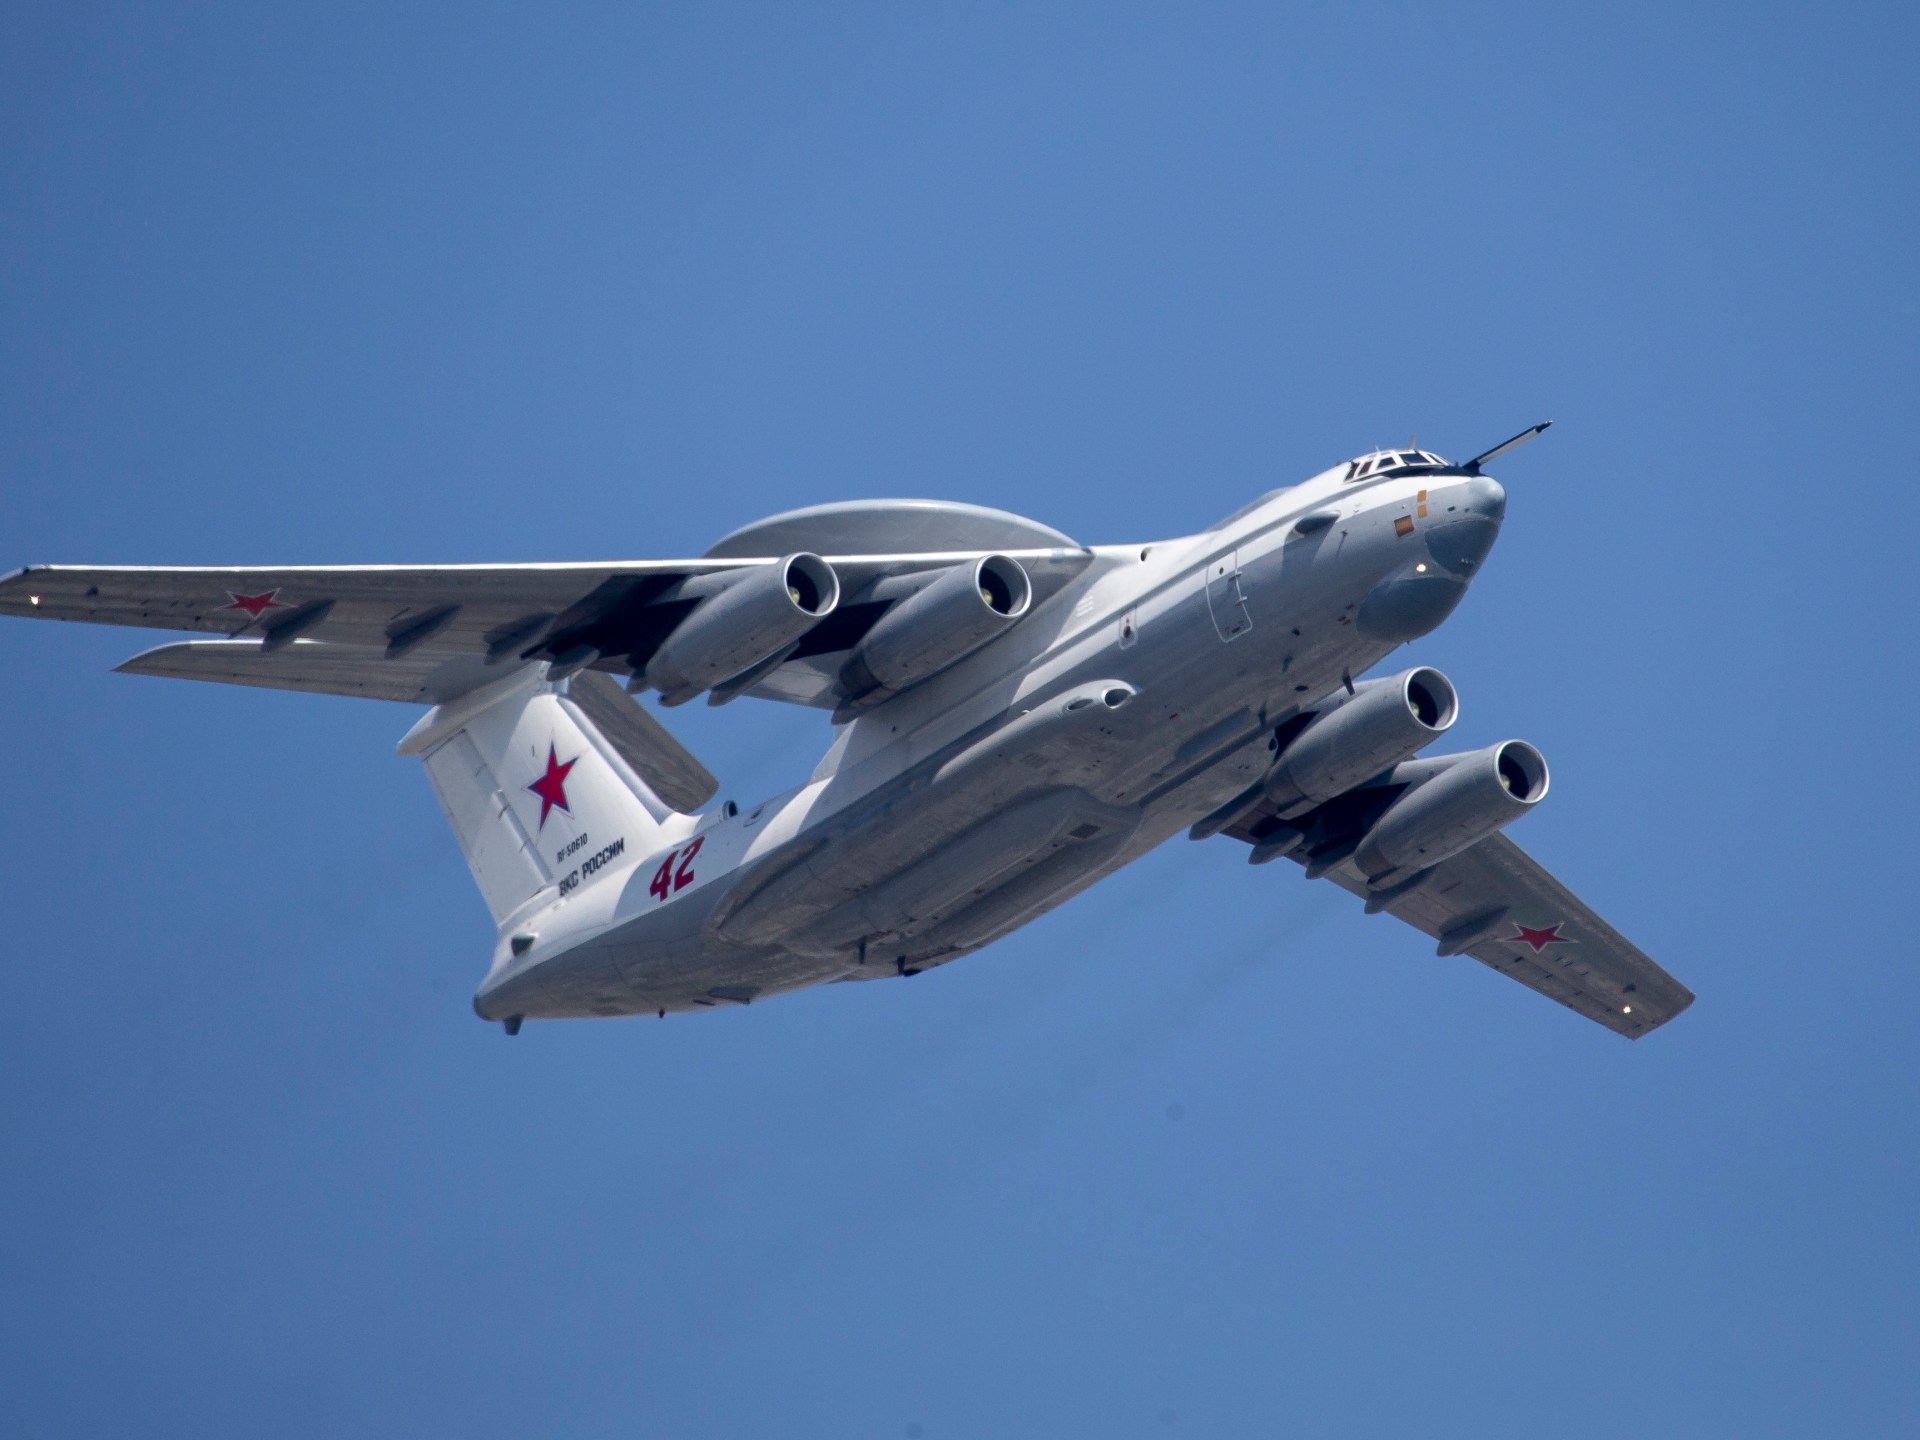 Ukraine says shot down two Russian command aircraft in blow to Moscow | Russia-Ukraine war News